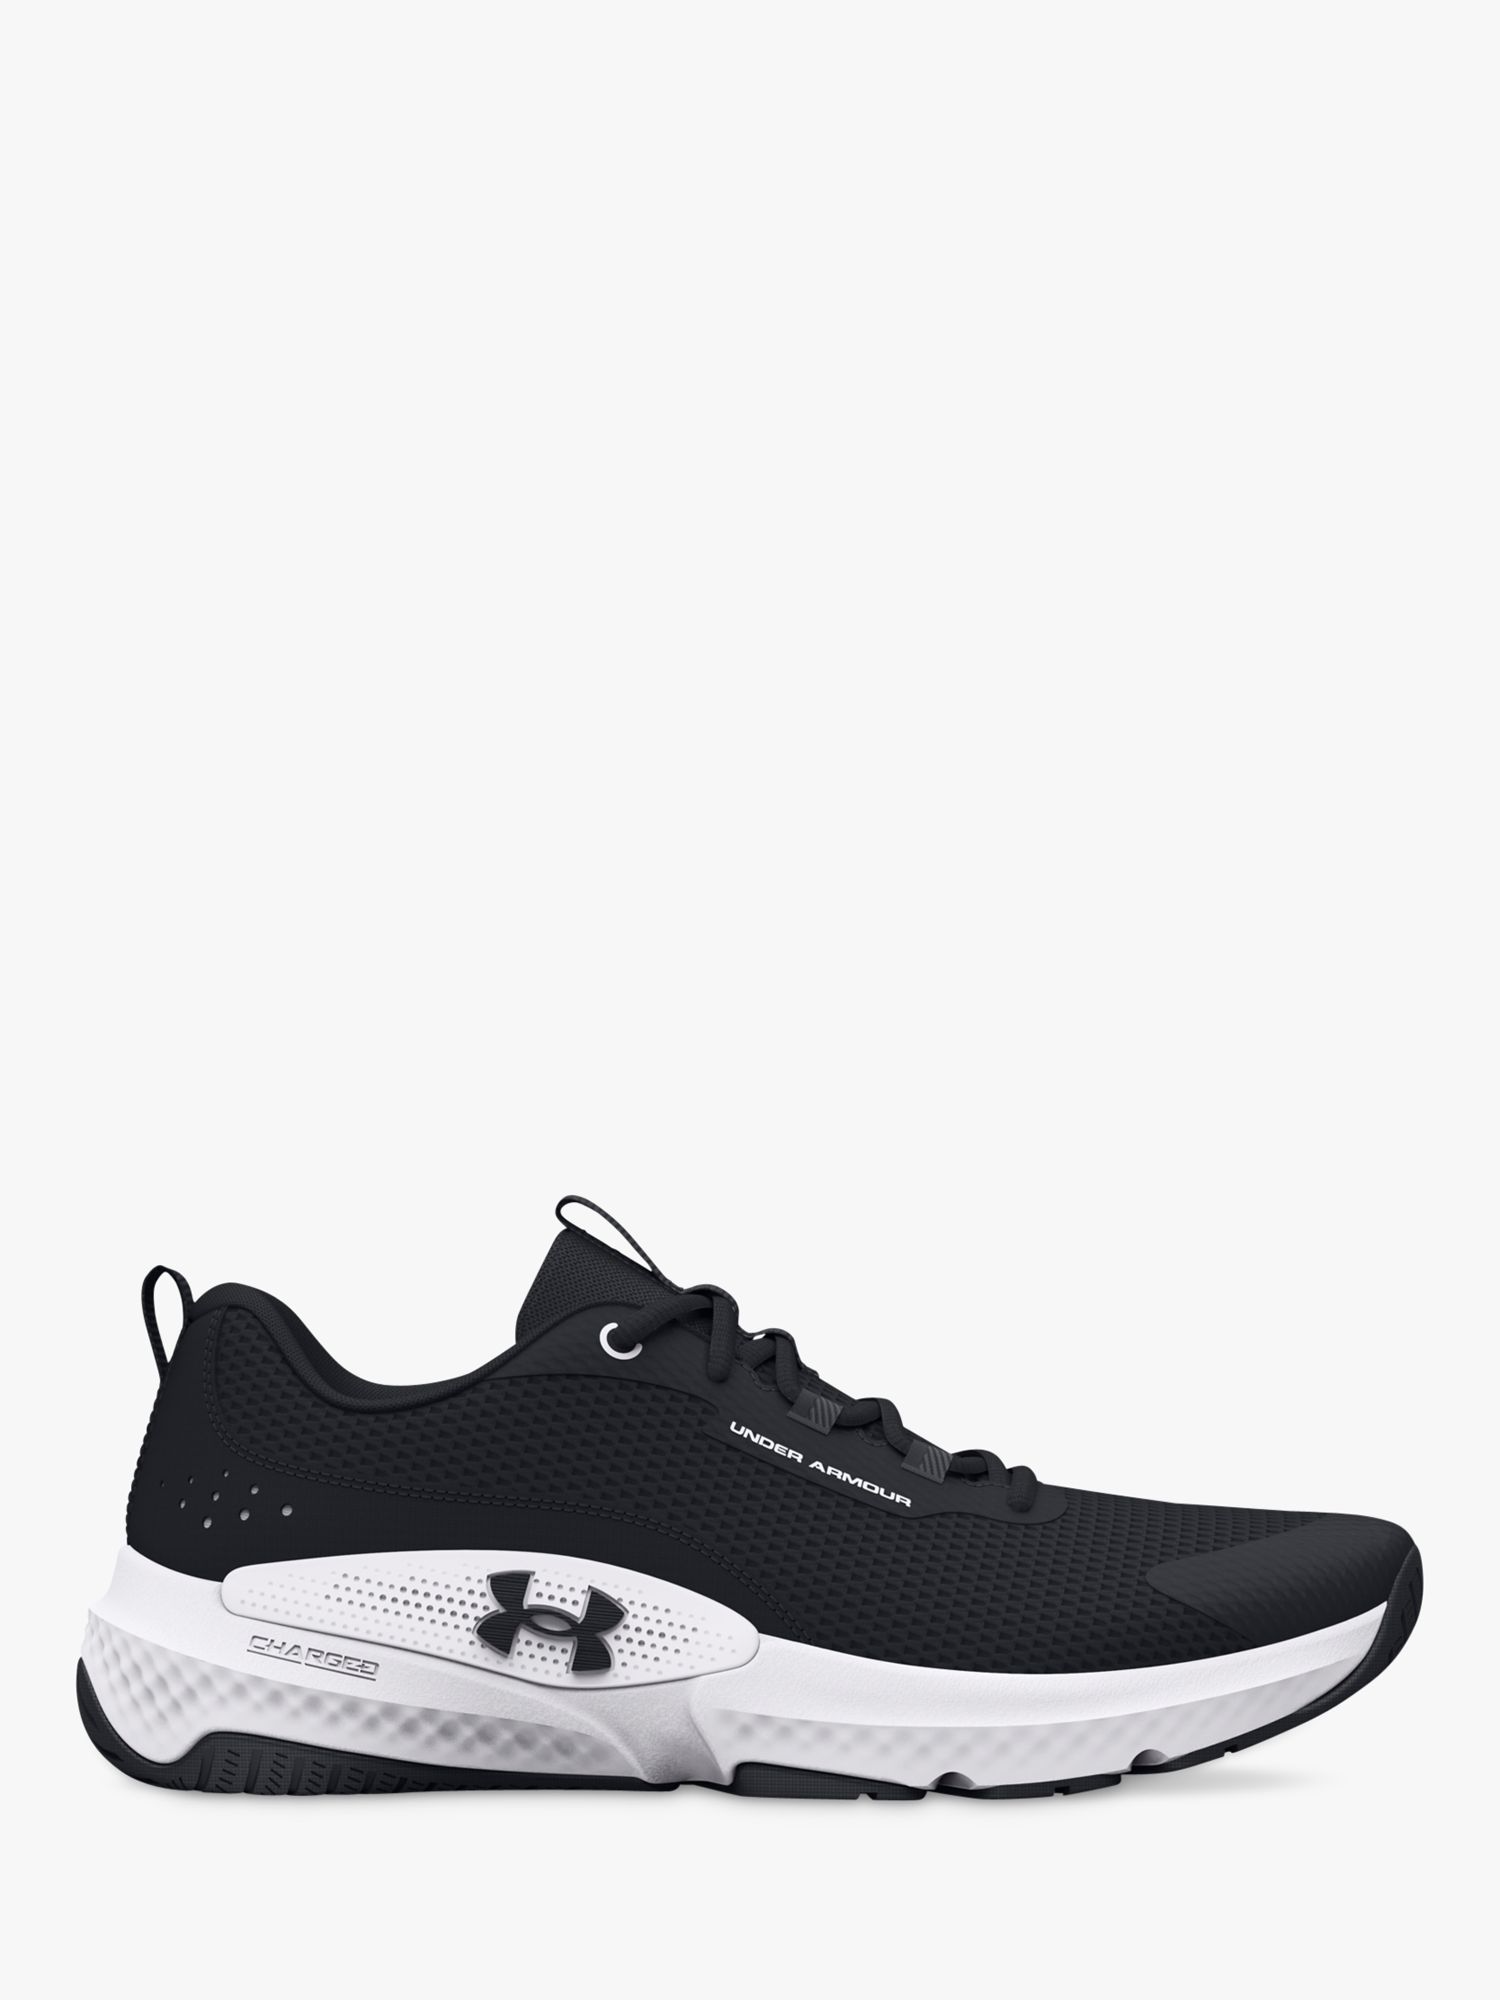 Under Armour Dynamic Select Women's Cross Trainers, Black/White/Black, 6